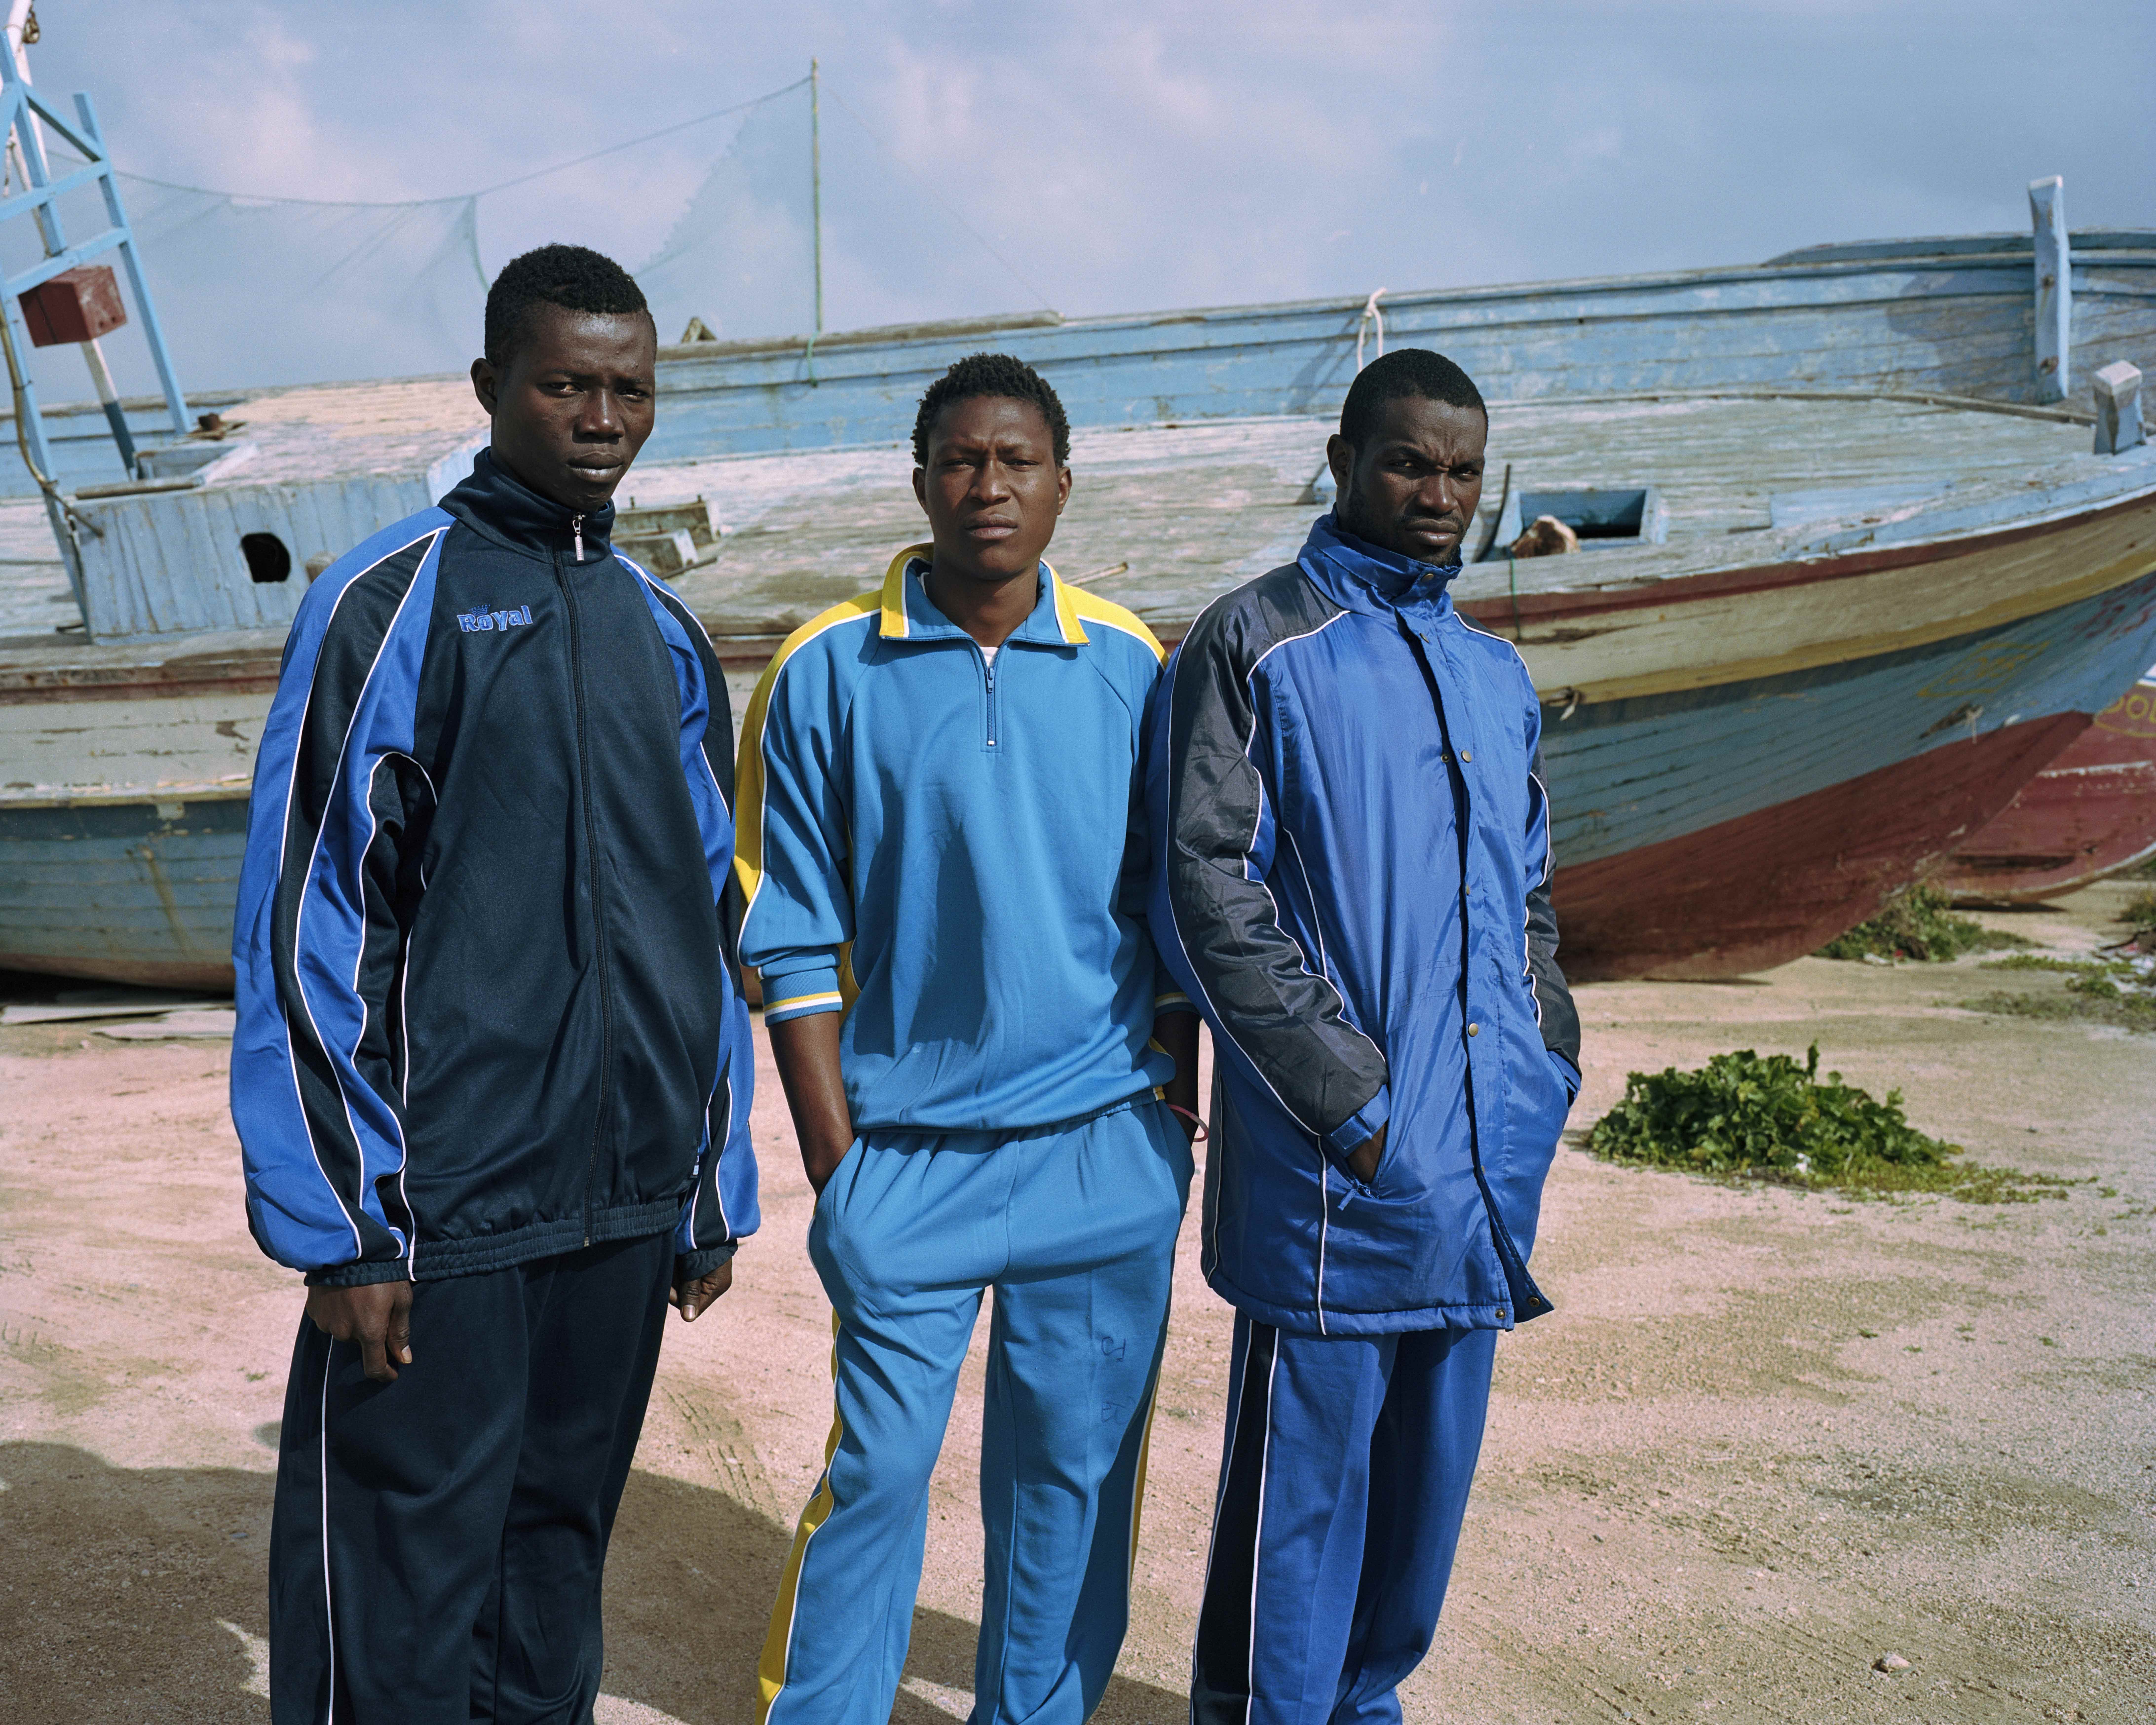 Somaro, 19, Bouba, 19, and Abdoul, 22, experienced a particularly rough journey and all expressed their trauma of what was faced at sea.  Copyright Daniel Castro Garcia